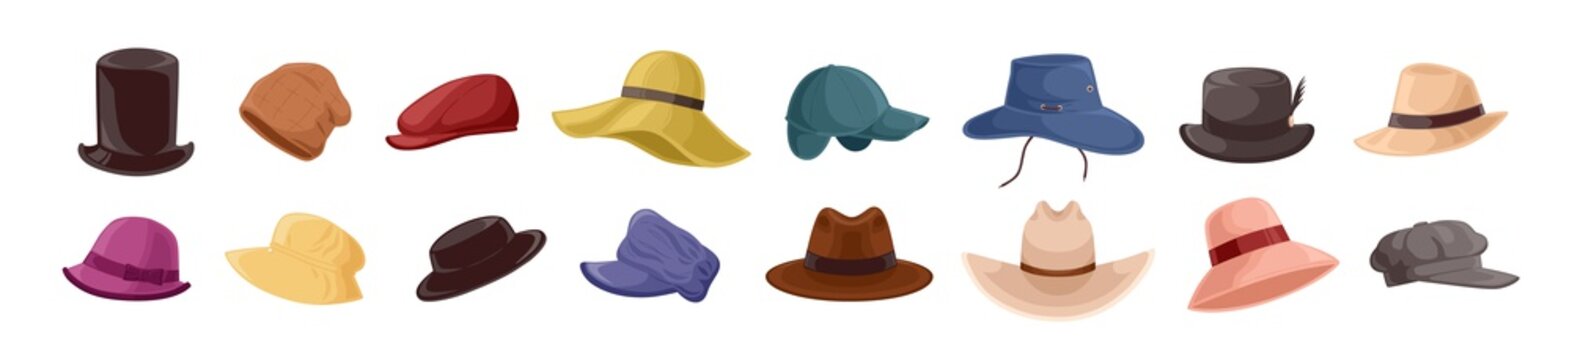 Collection of stylish men s and women s headwear of various types - hats, caps, kepi isolated on white background. Bundle of fashion accessories. Colorful vector illustration in flat cartoon style.